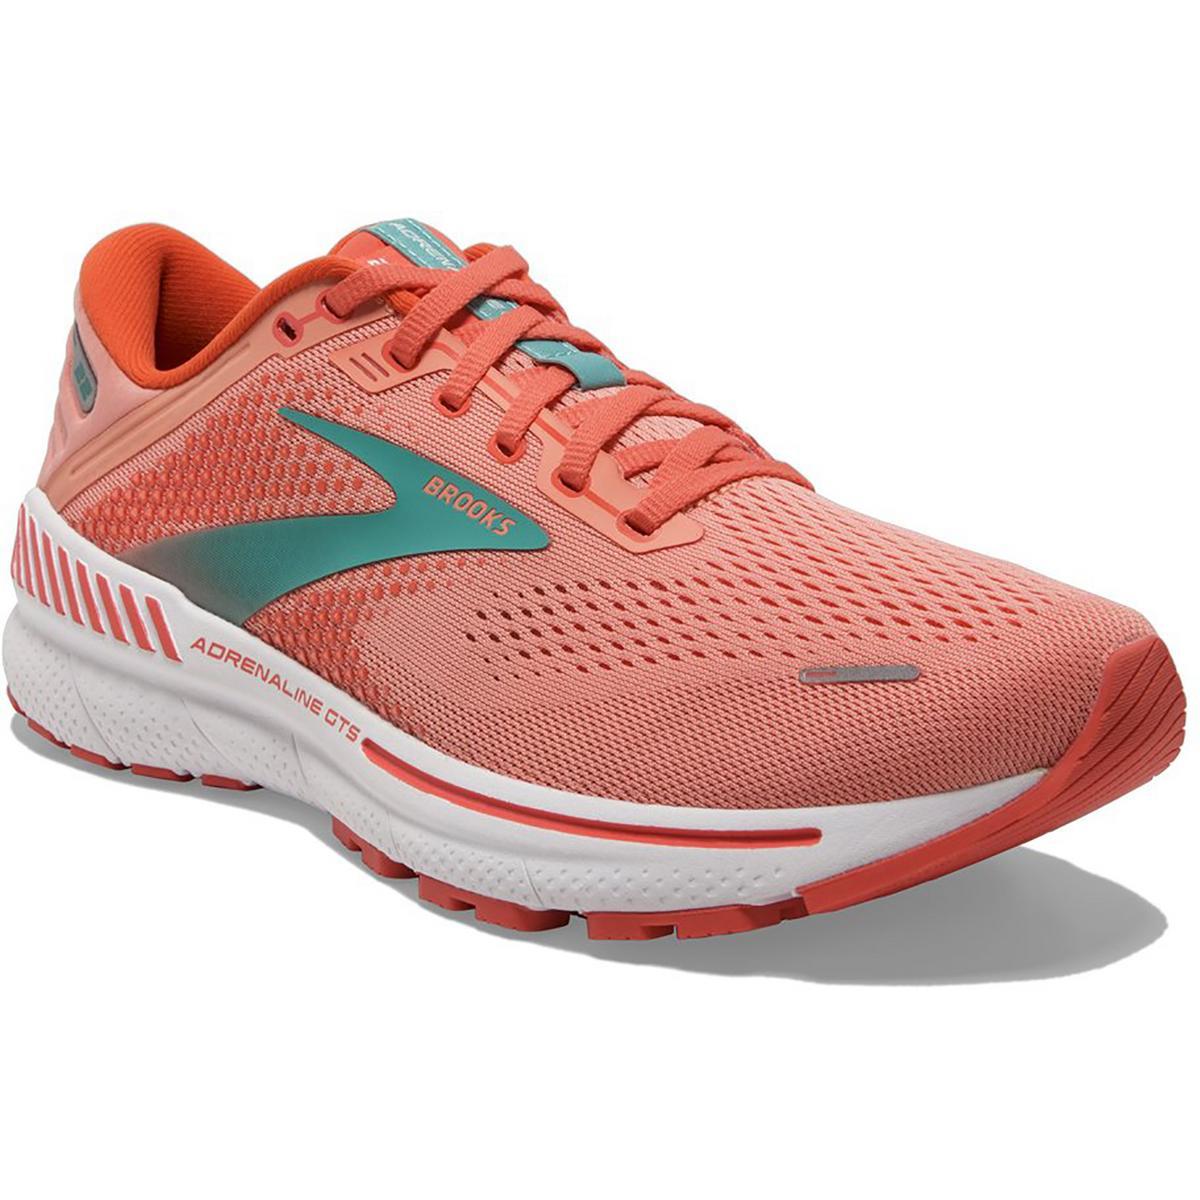 Brooks Womens Adrenaline Gts 22 Athletic and Training Shoes Sneakers Bhfo 7537 Coral/Latigo Bay/White